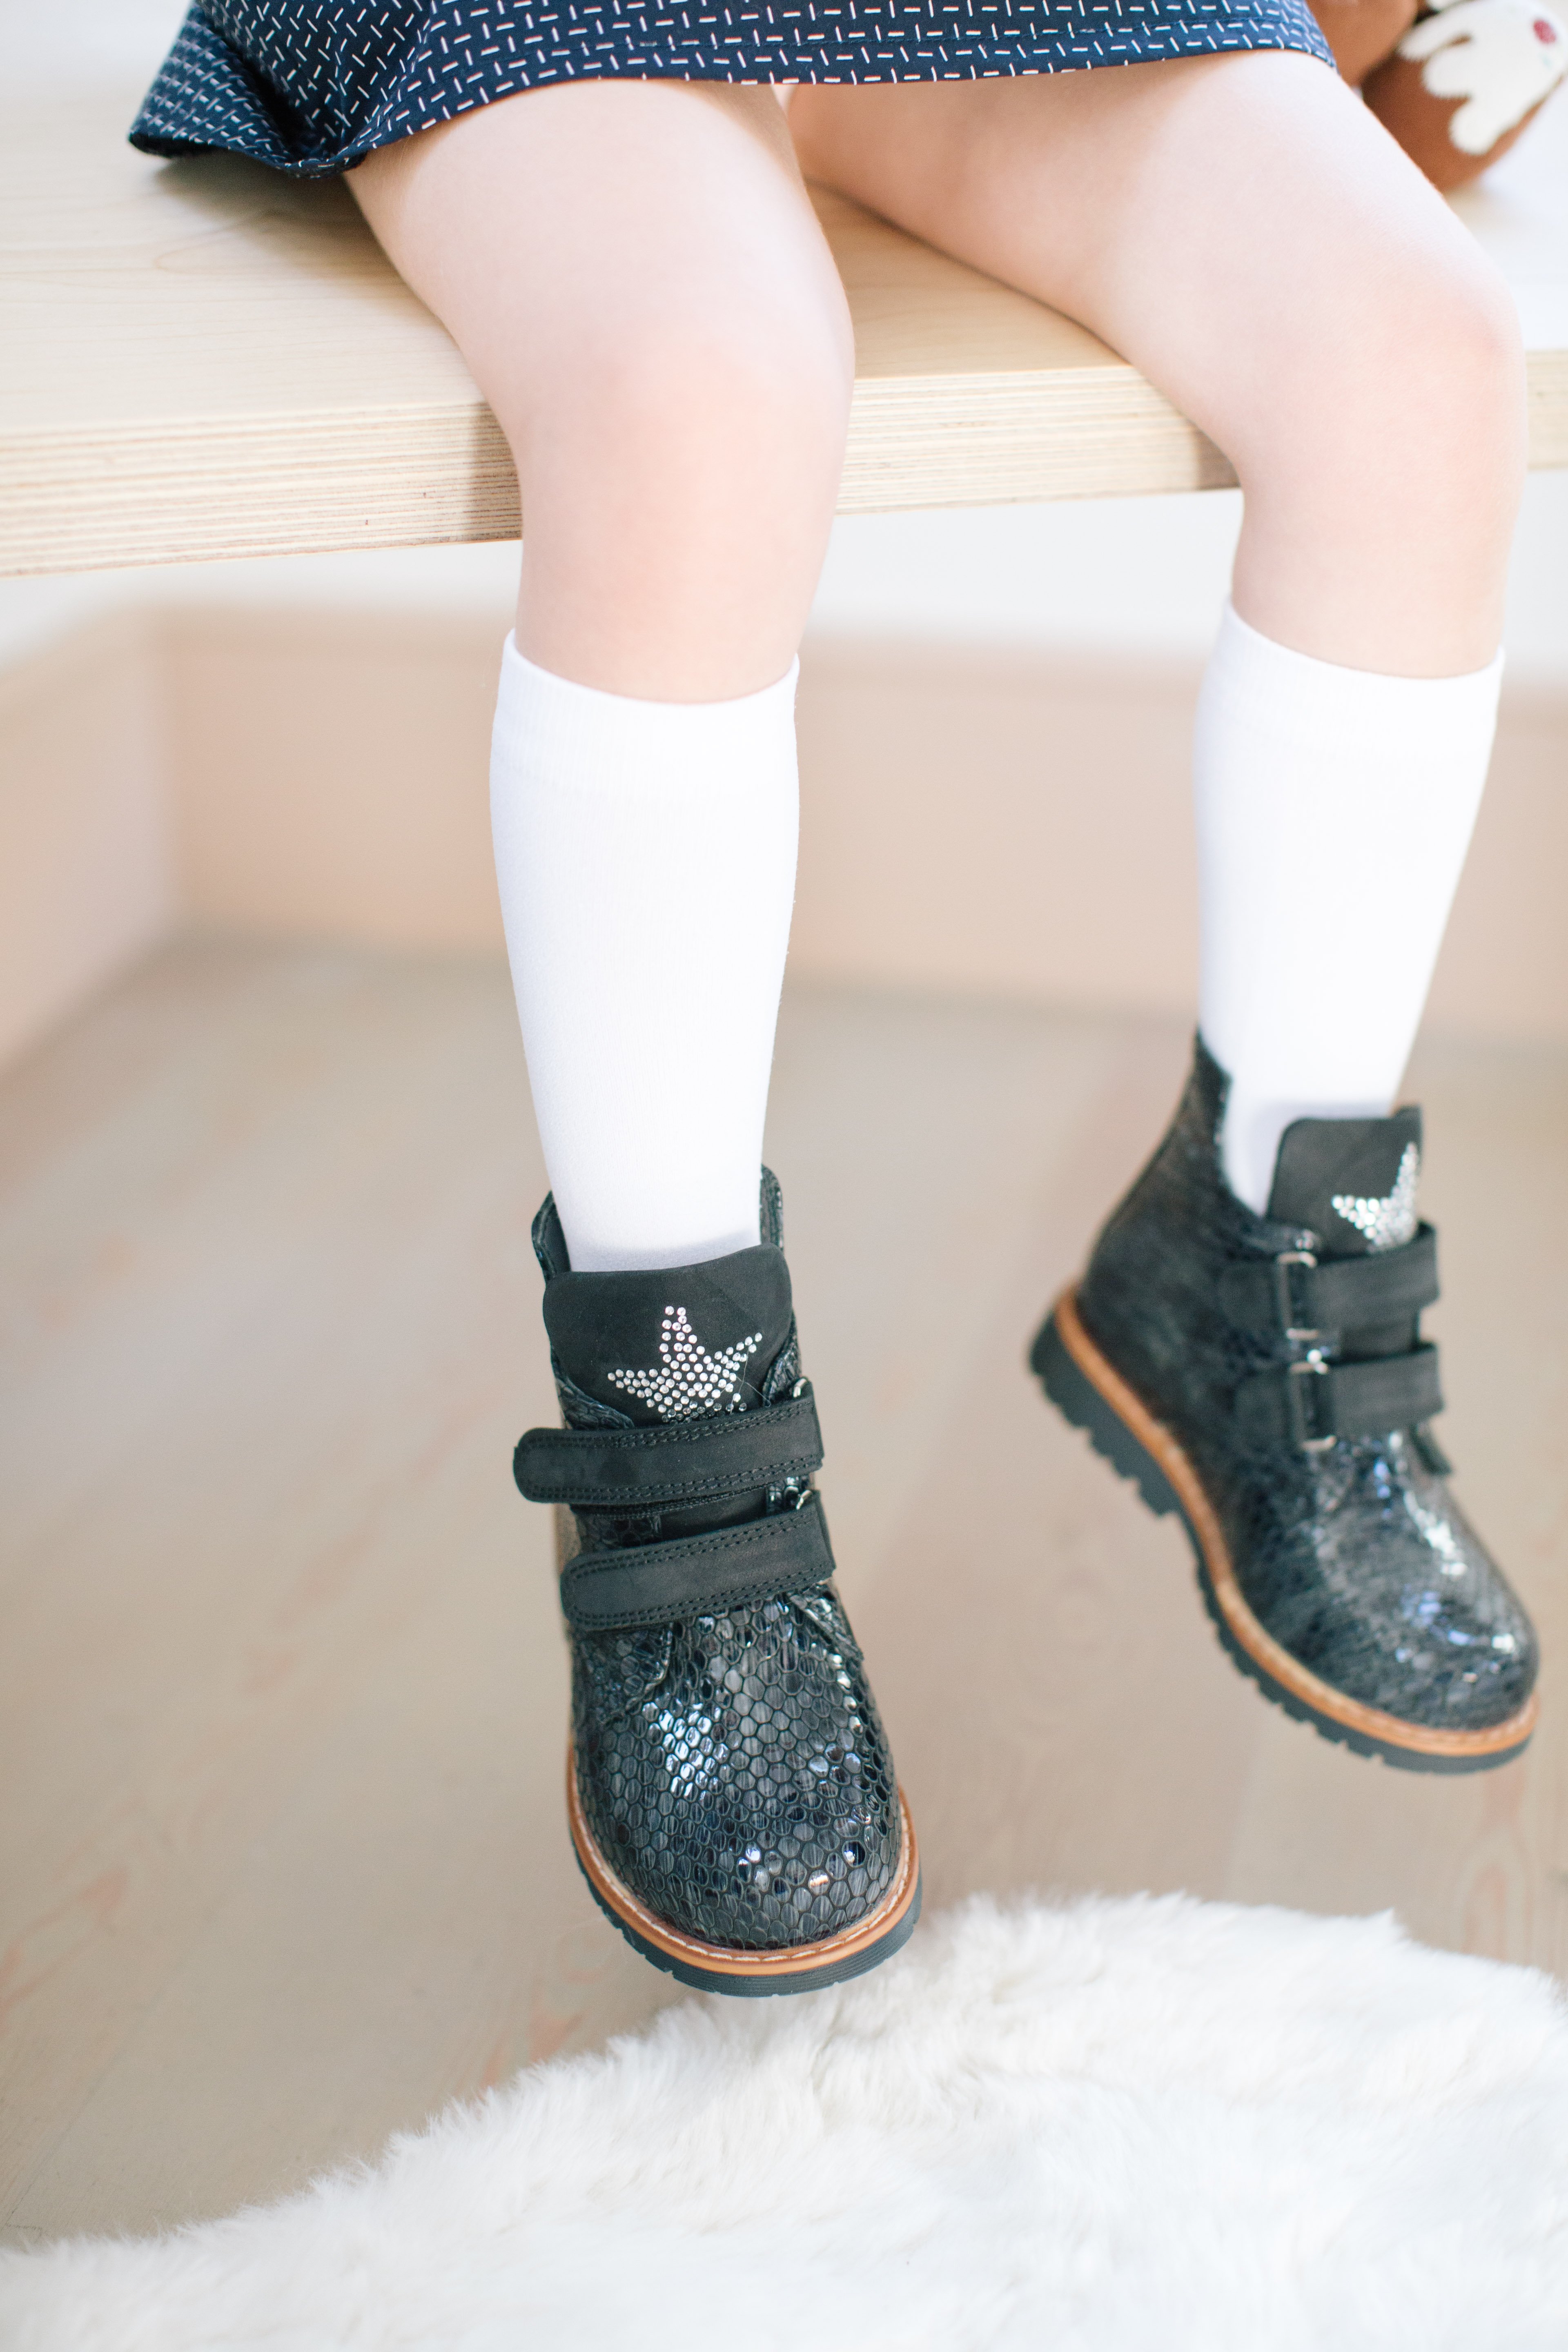 leather footwear for children